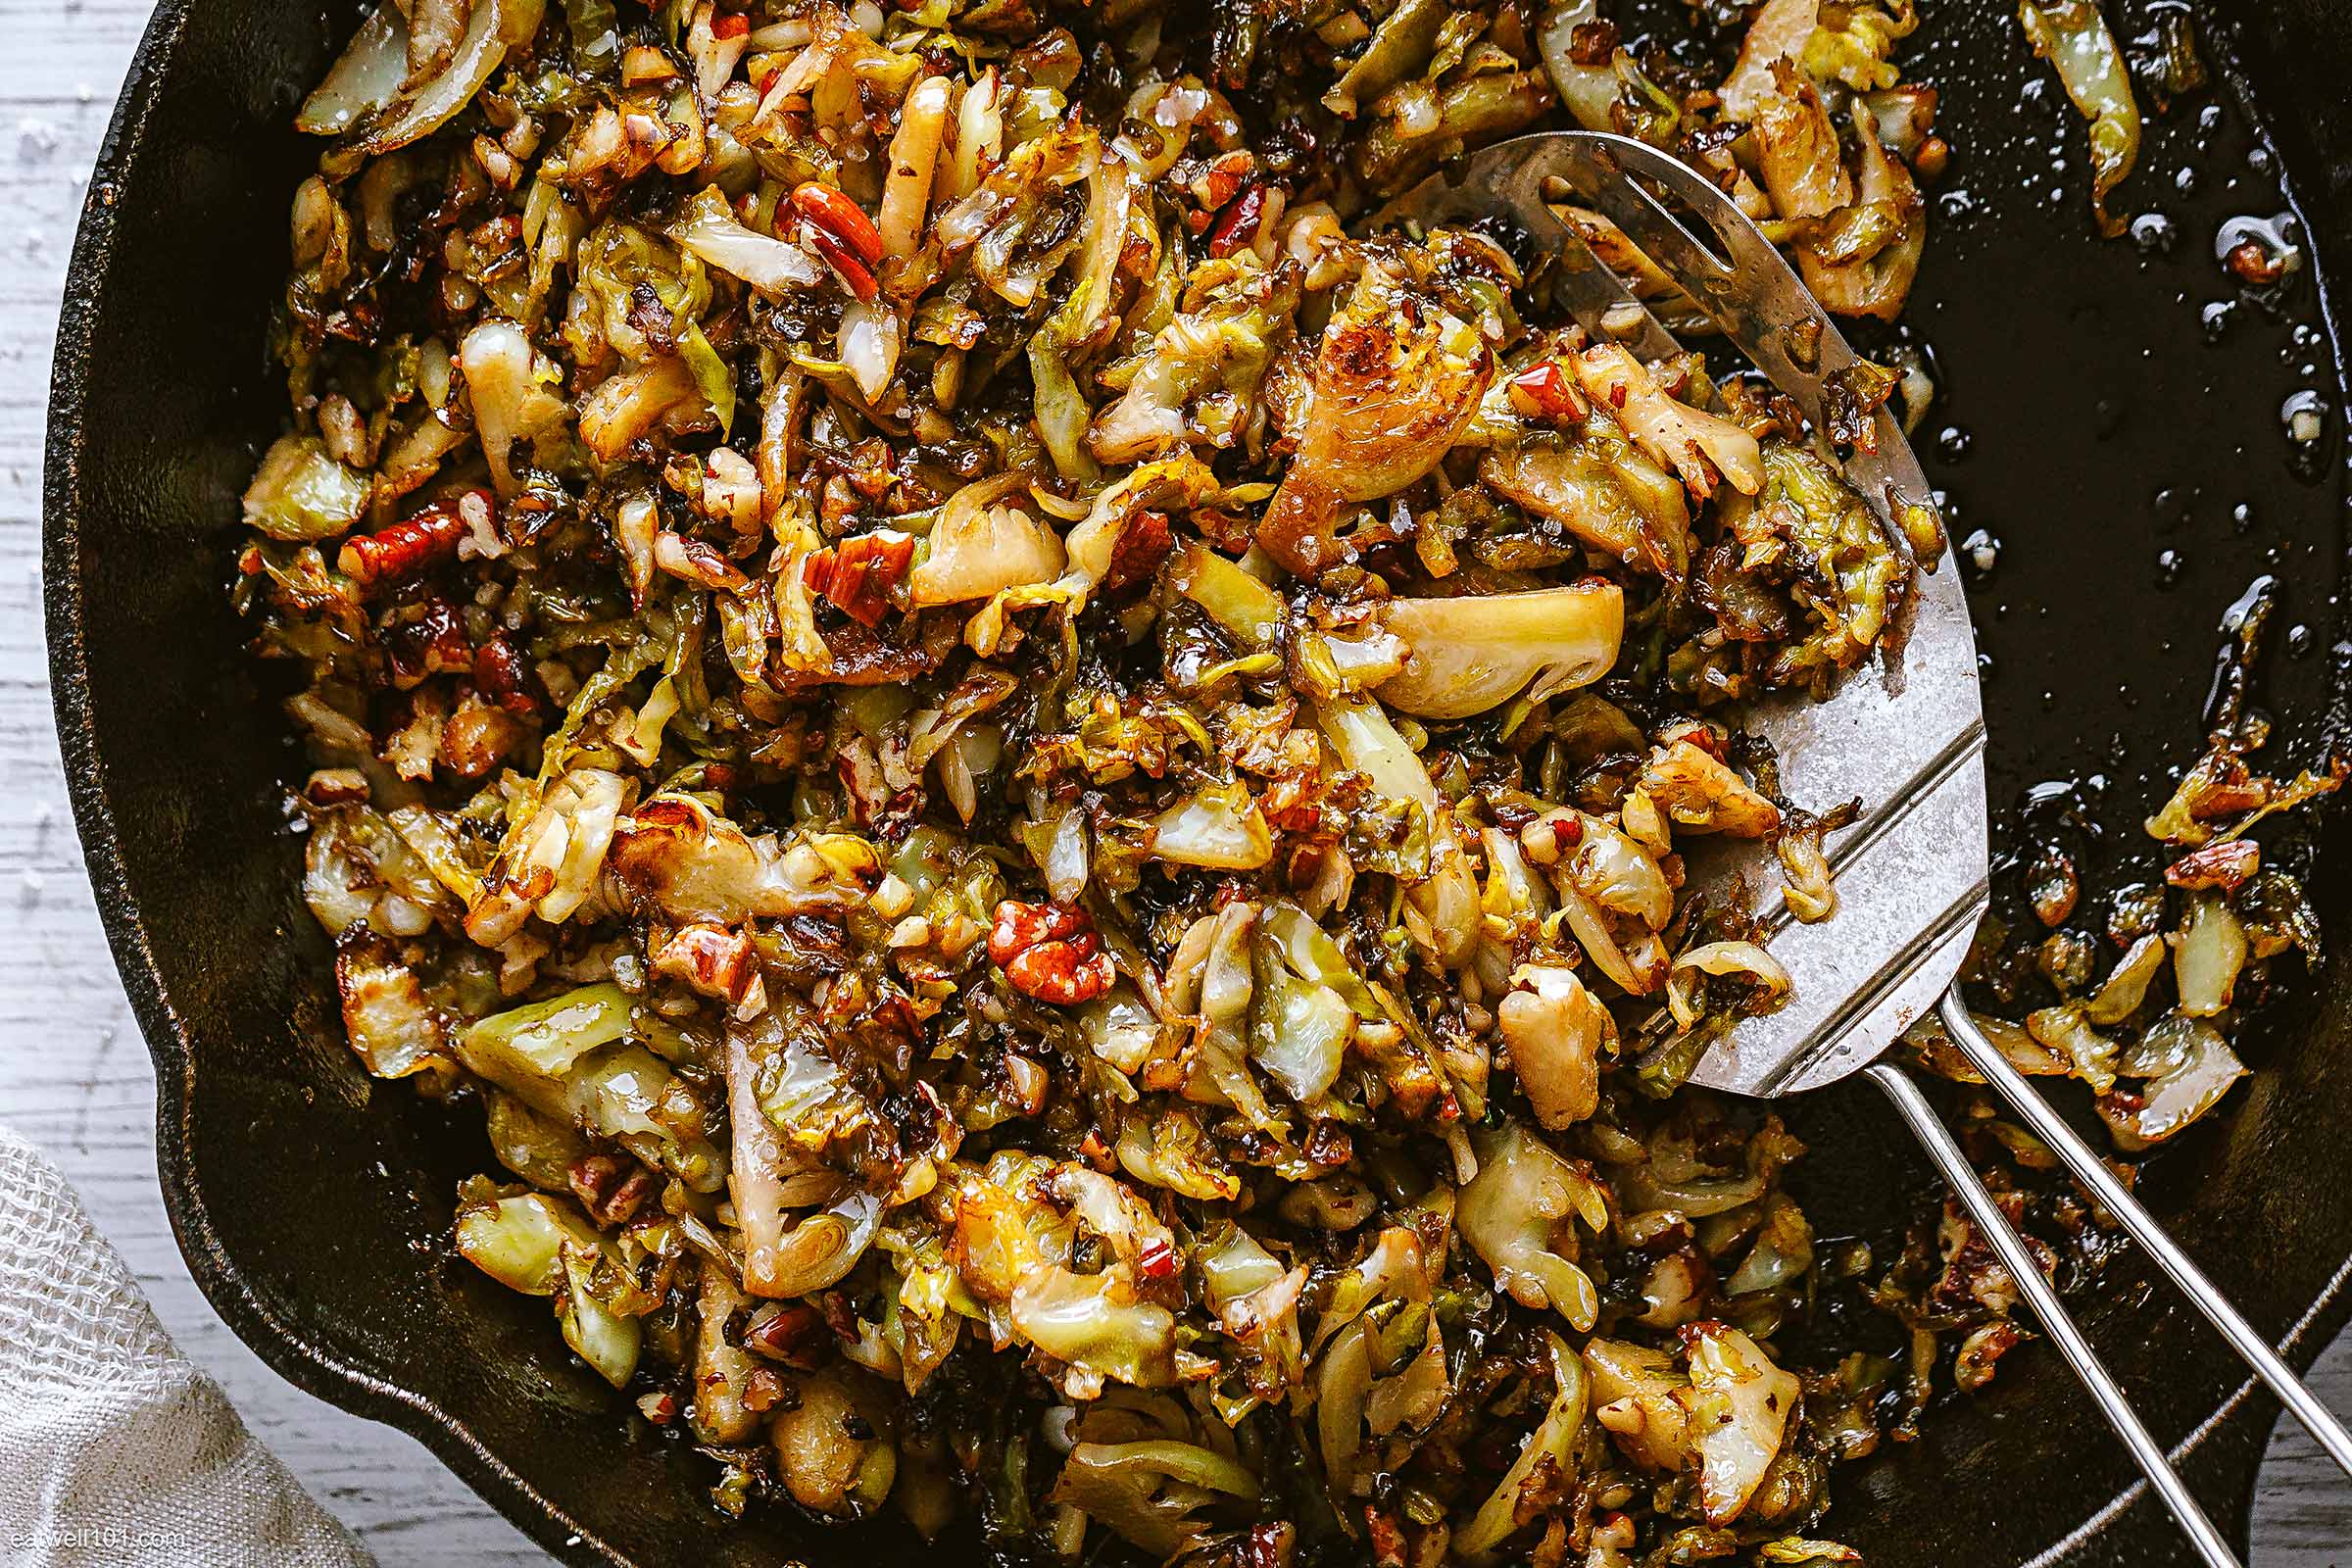 Fried Brussels Sprouts with Cider Vinaigrette and Pecan